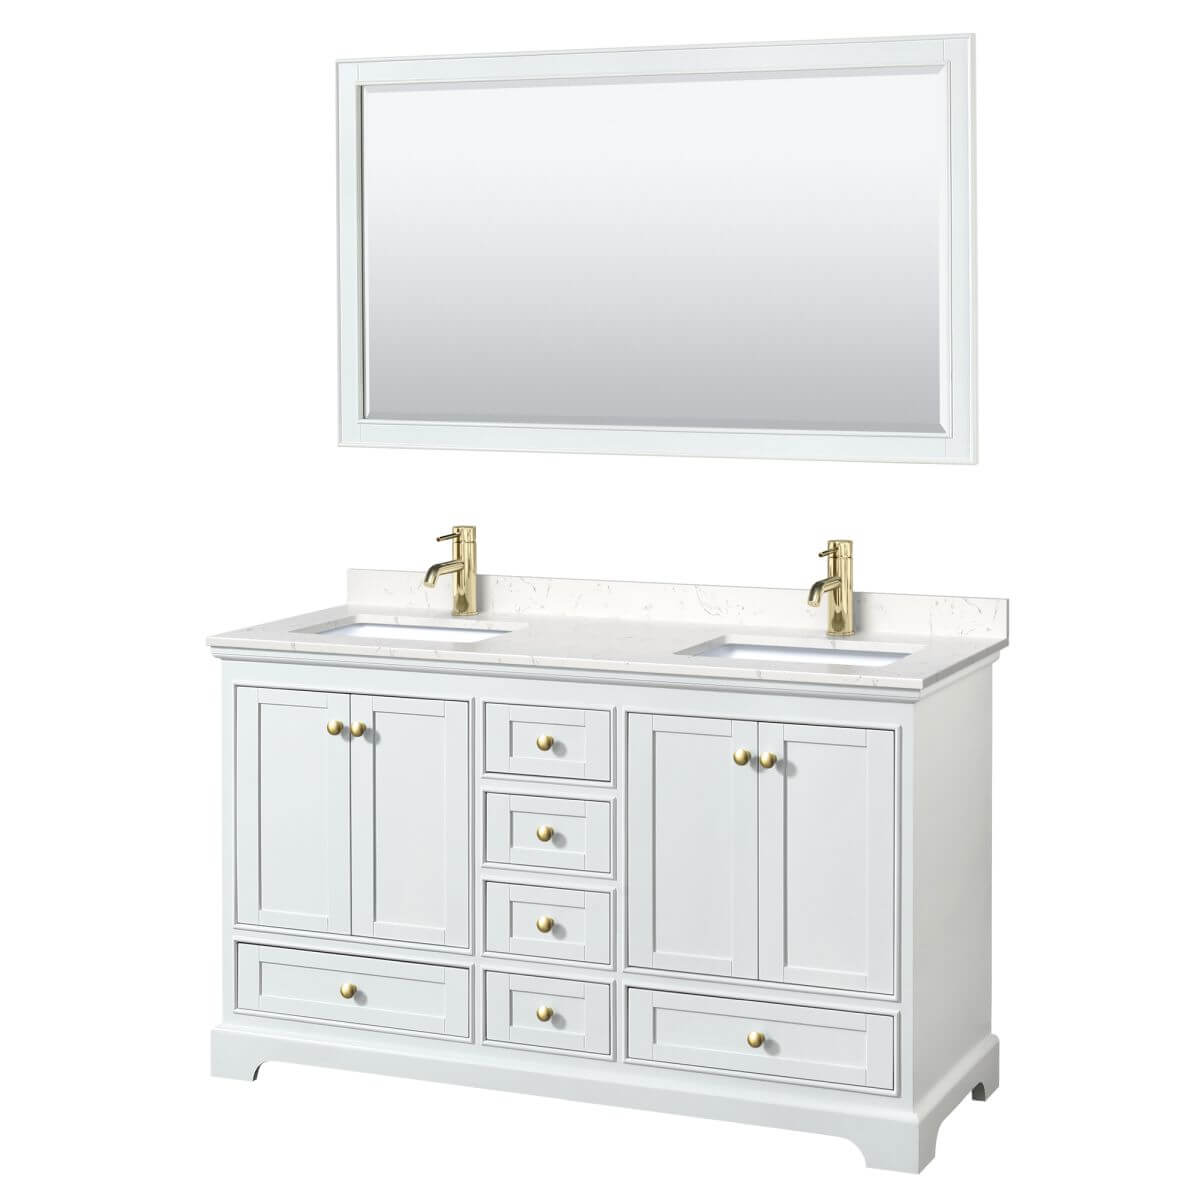 Wyndham Collection Deborah 60 inch Double Bathroom Vanity in White with Carrara Cultured Marble Countertop, Undermount Square Sinks, Brushed Gold Trim and 58 inch Mirror - WCS202060DWGC2UNSM58